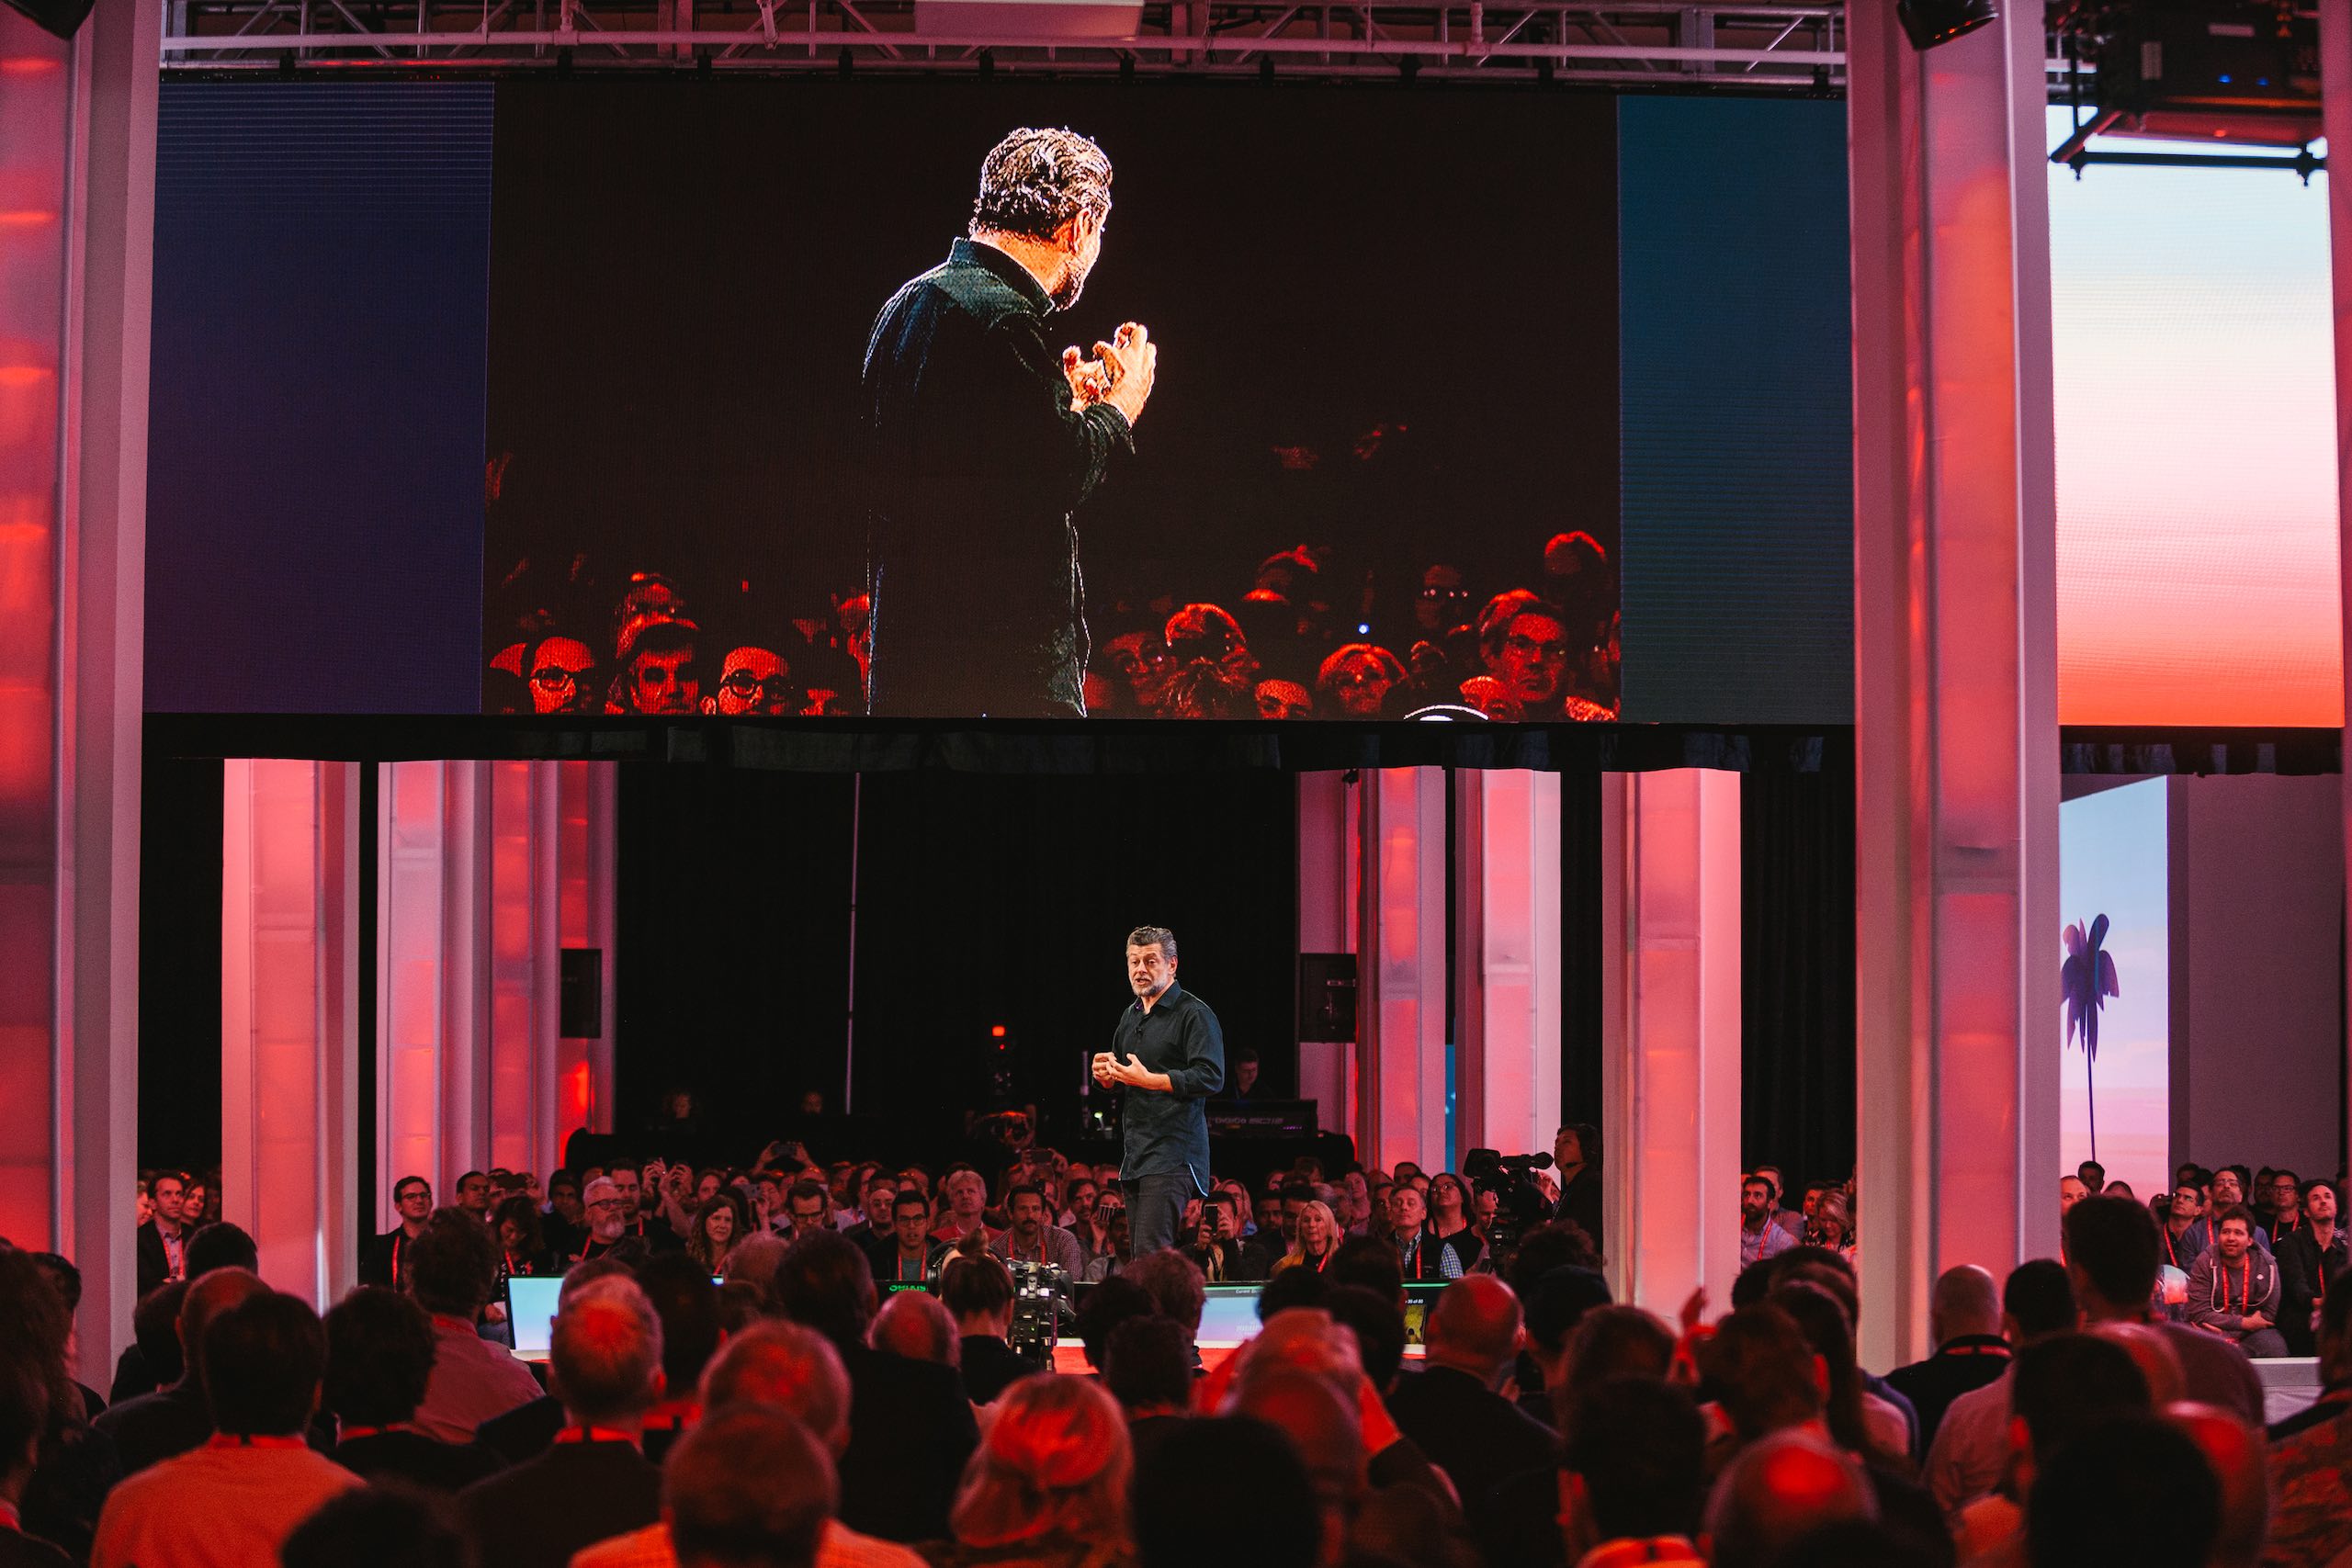 Man with short gray beard on stage at a Free Your Mind event talking to the audience surrounding him with him projected on a screen above him